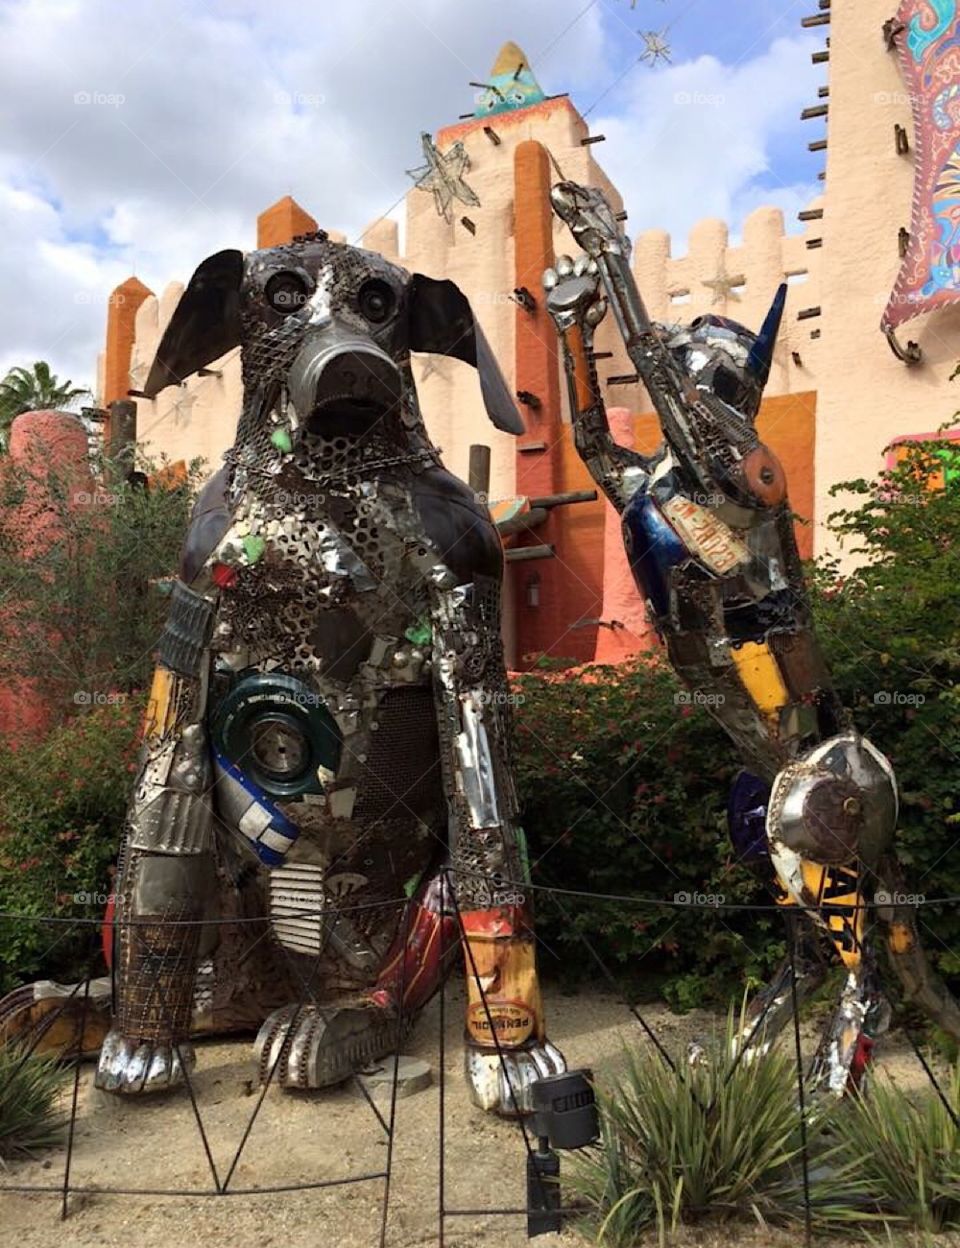 Artistic sculpture of a dog and cat in Tampa, FL at Busch Gardens.